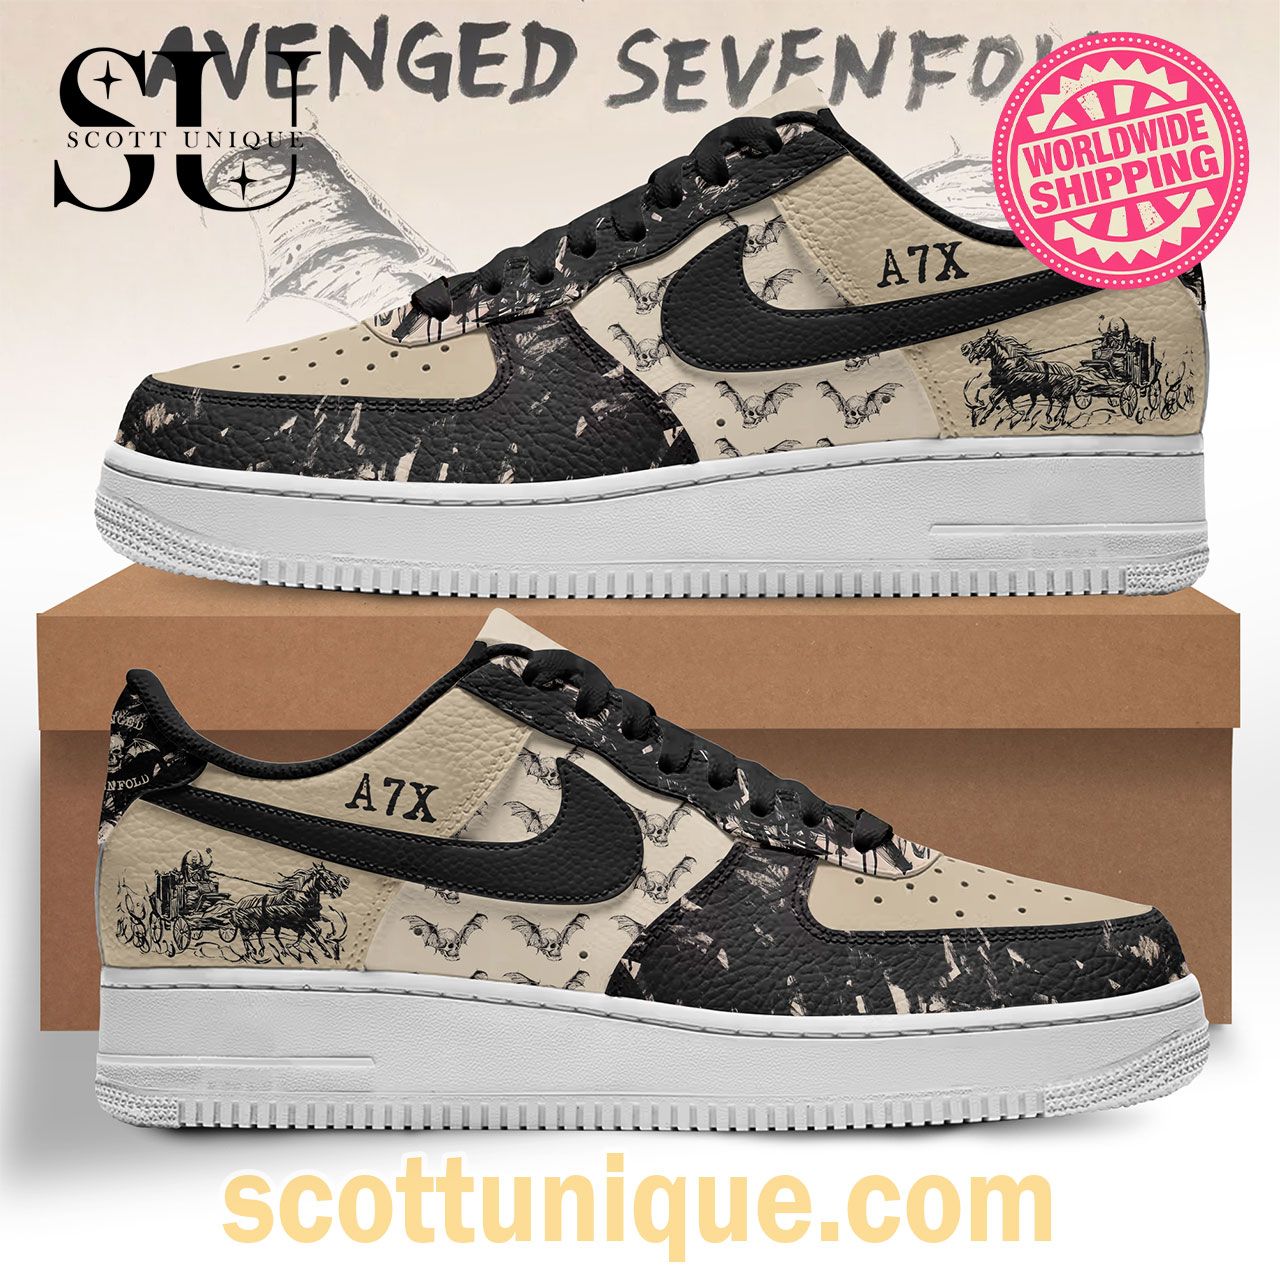 A7X Avenged Sevenfold Album Nike Air Force 1 Shoes